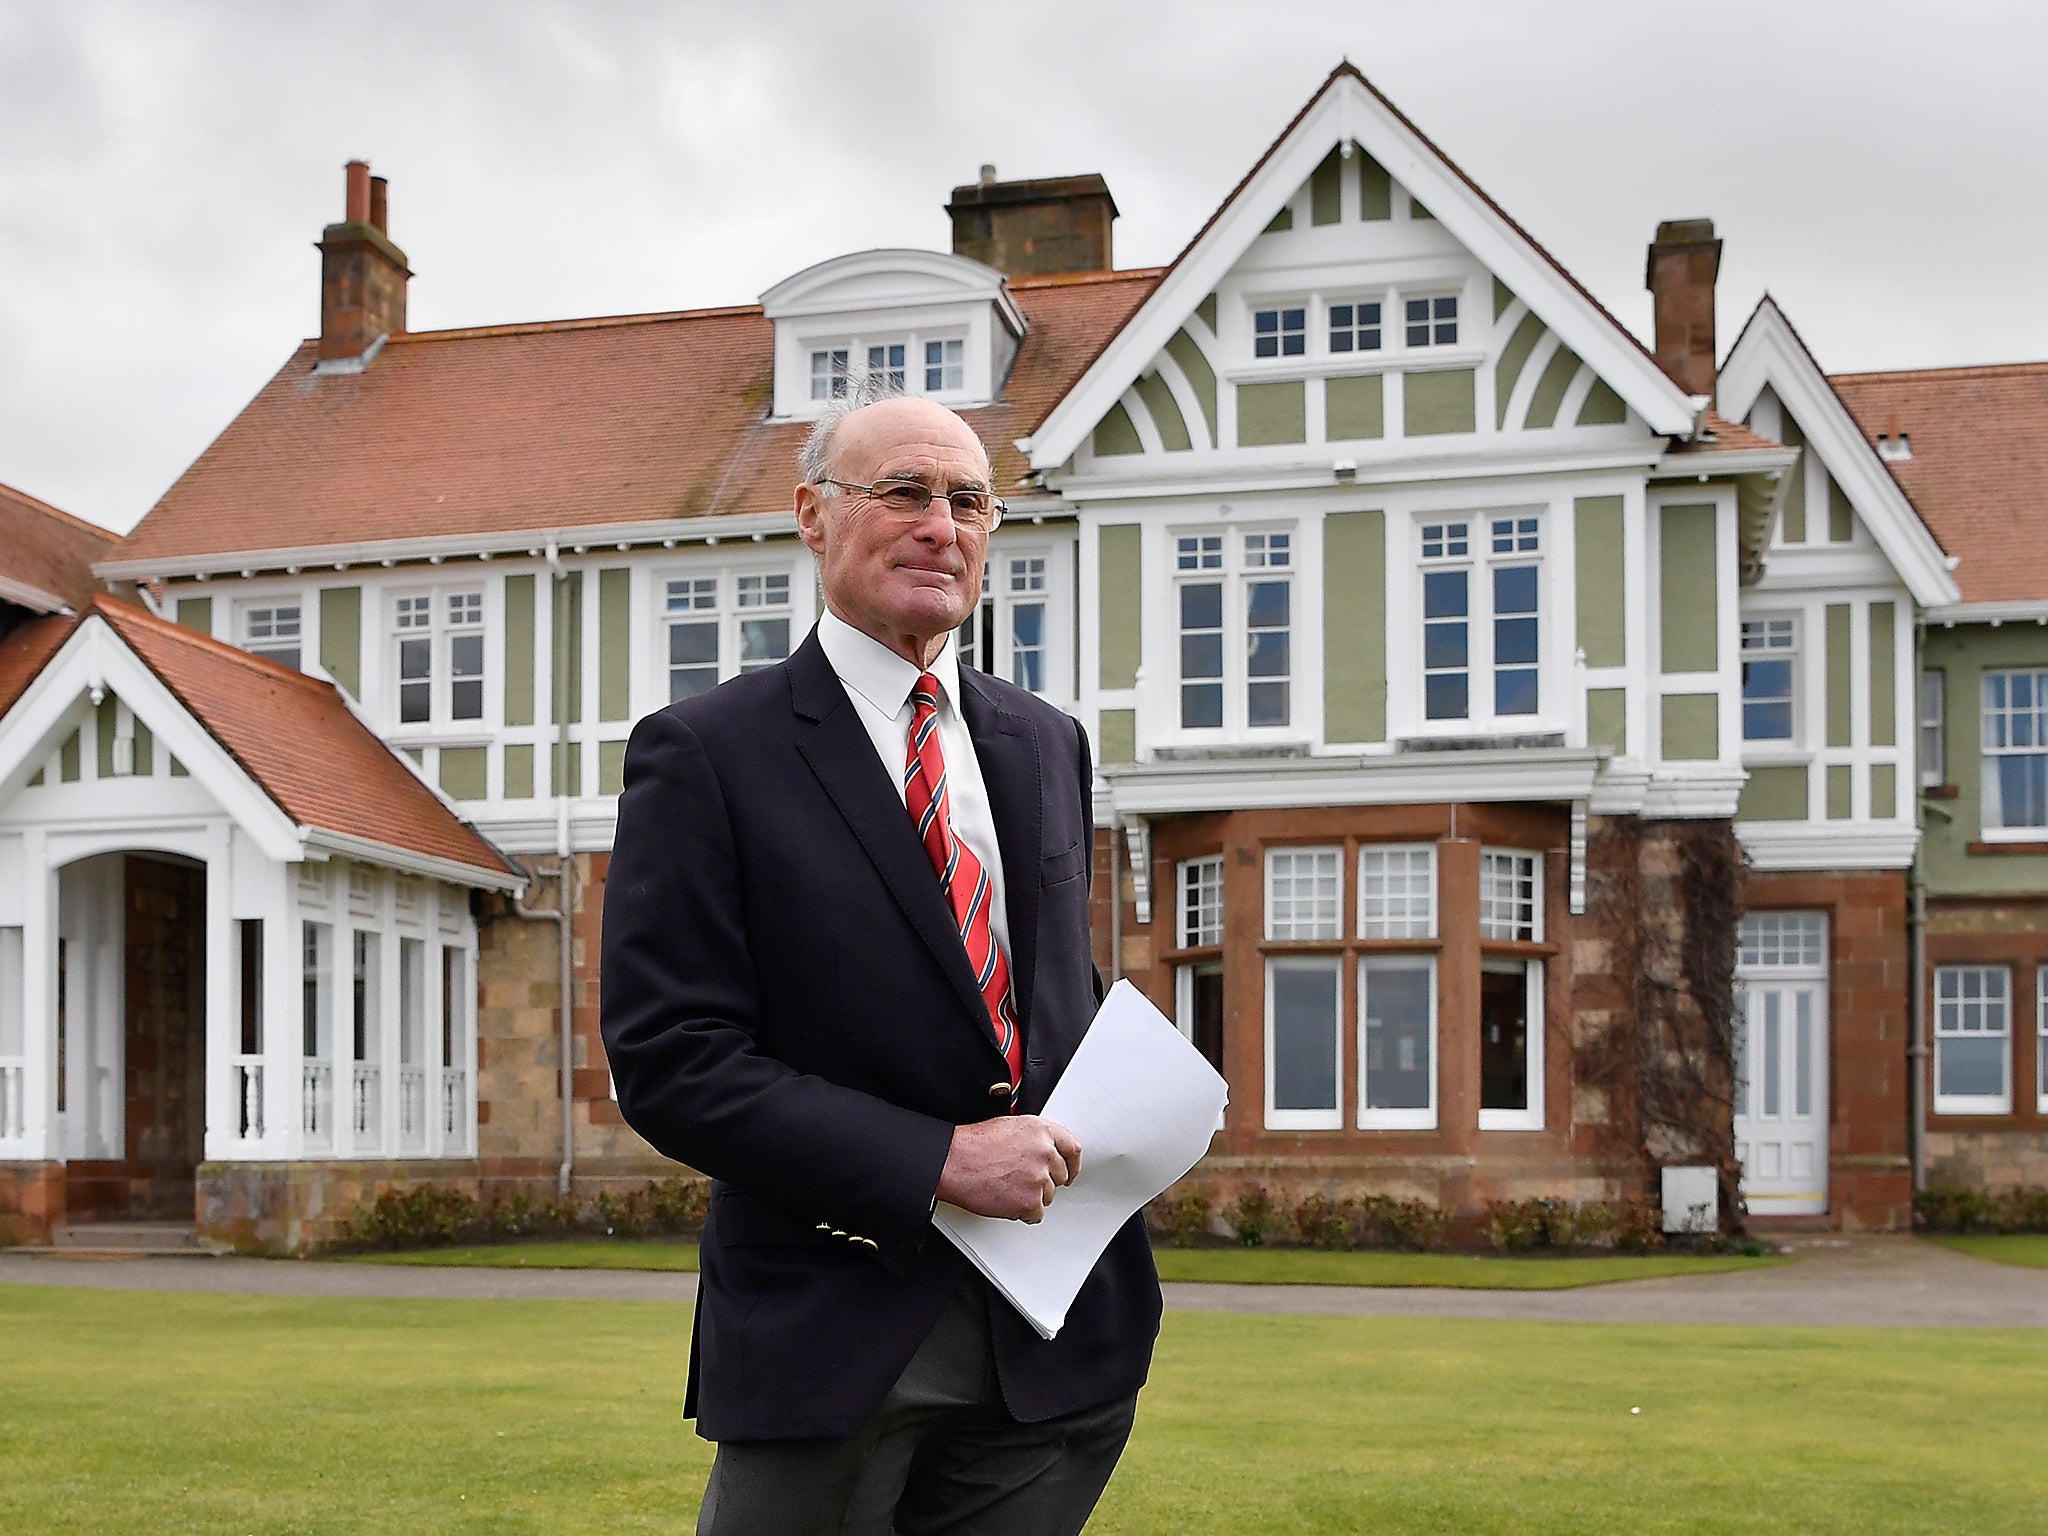 The golf club’s first vote narrowly failed to achieve the two-thirds majority required in May last year